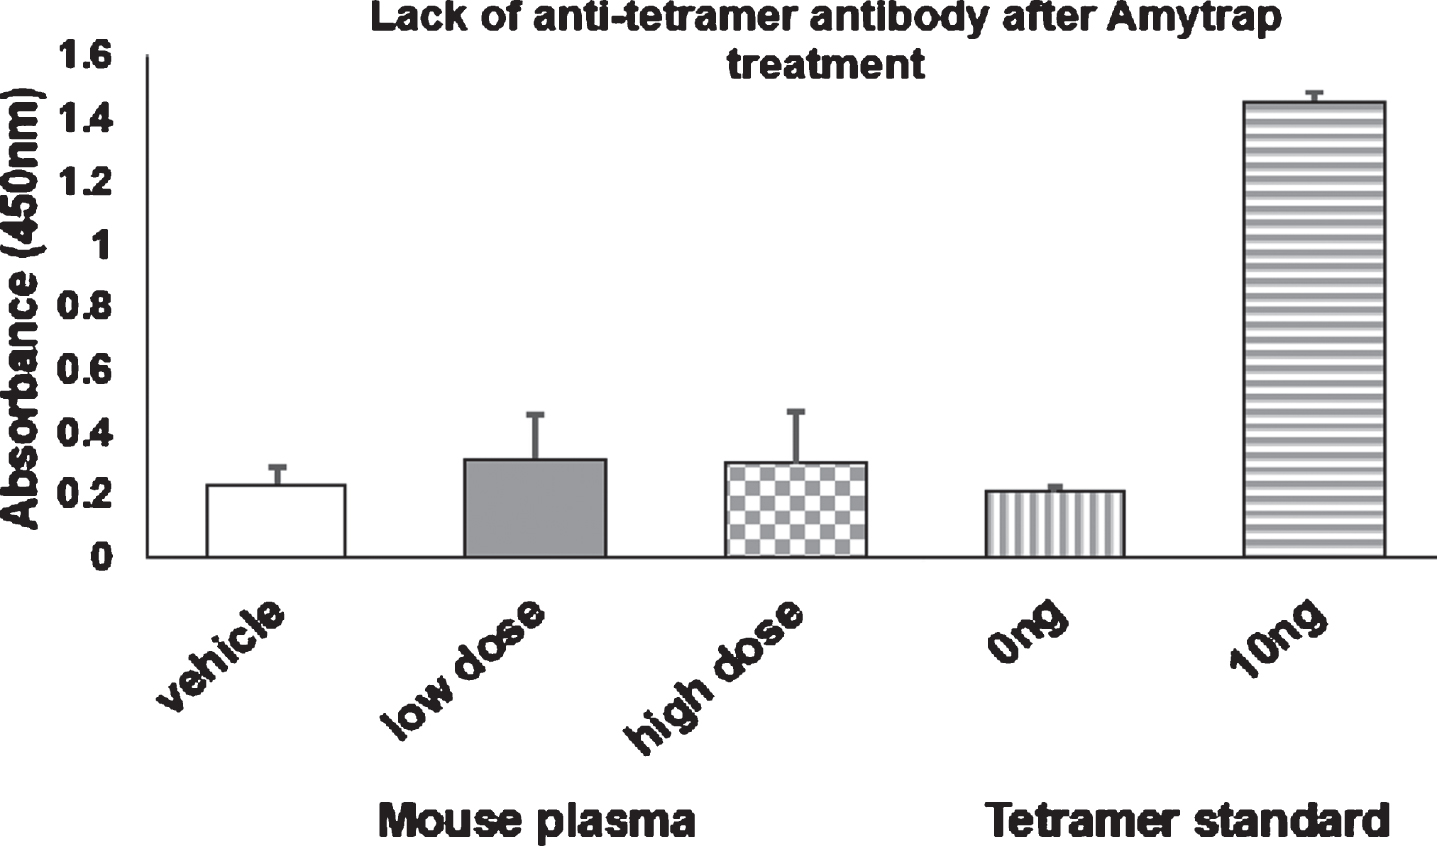 Immunogenicity of Amytrap peptide. 9-month-old mice were injected with Amytrap conjugate (6.45 or 16.1 mg/kg; Low or High dose) biweekly for 5 months. Amytrap peptide was coated into each well at 10 ng/well. Measurement of anti-RI-peptide antibody in plasma in comparison with a standardized anti-RI-peptide antibody. Absorbance values are expressed as Mean±SE of absorbance. Each mouse plasma was taken in triplicate from vehicle (n = 10), low dose (n = 11), and high dose (n = 11) groups. Experiments were performed in triplicate.